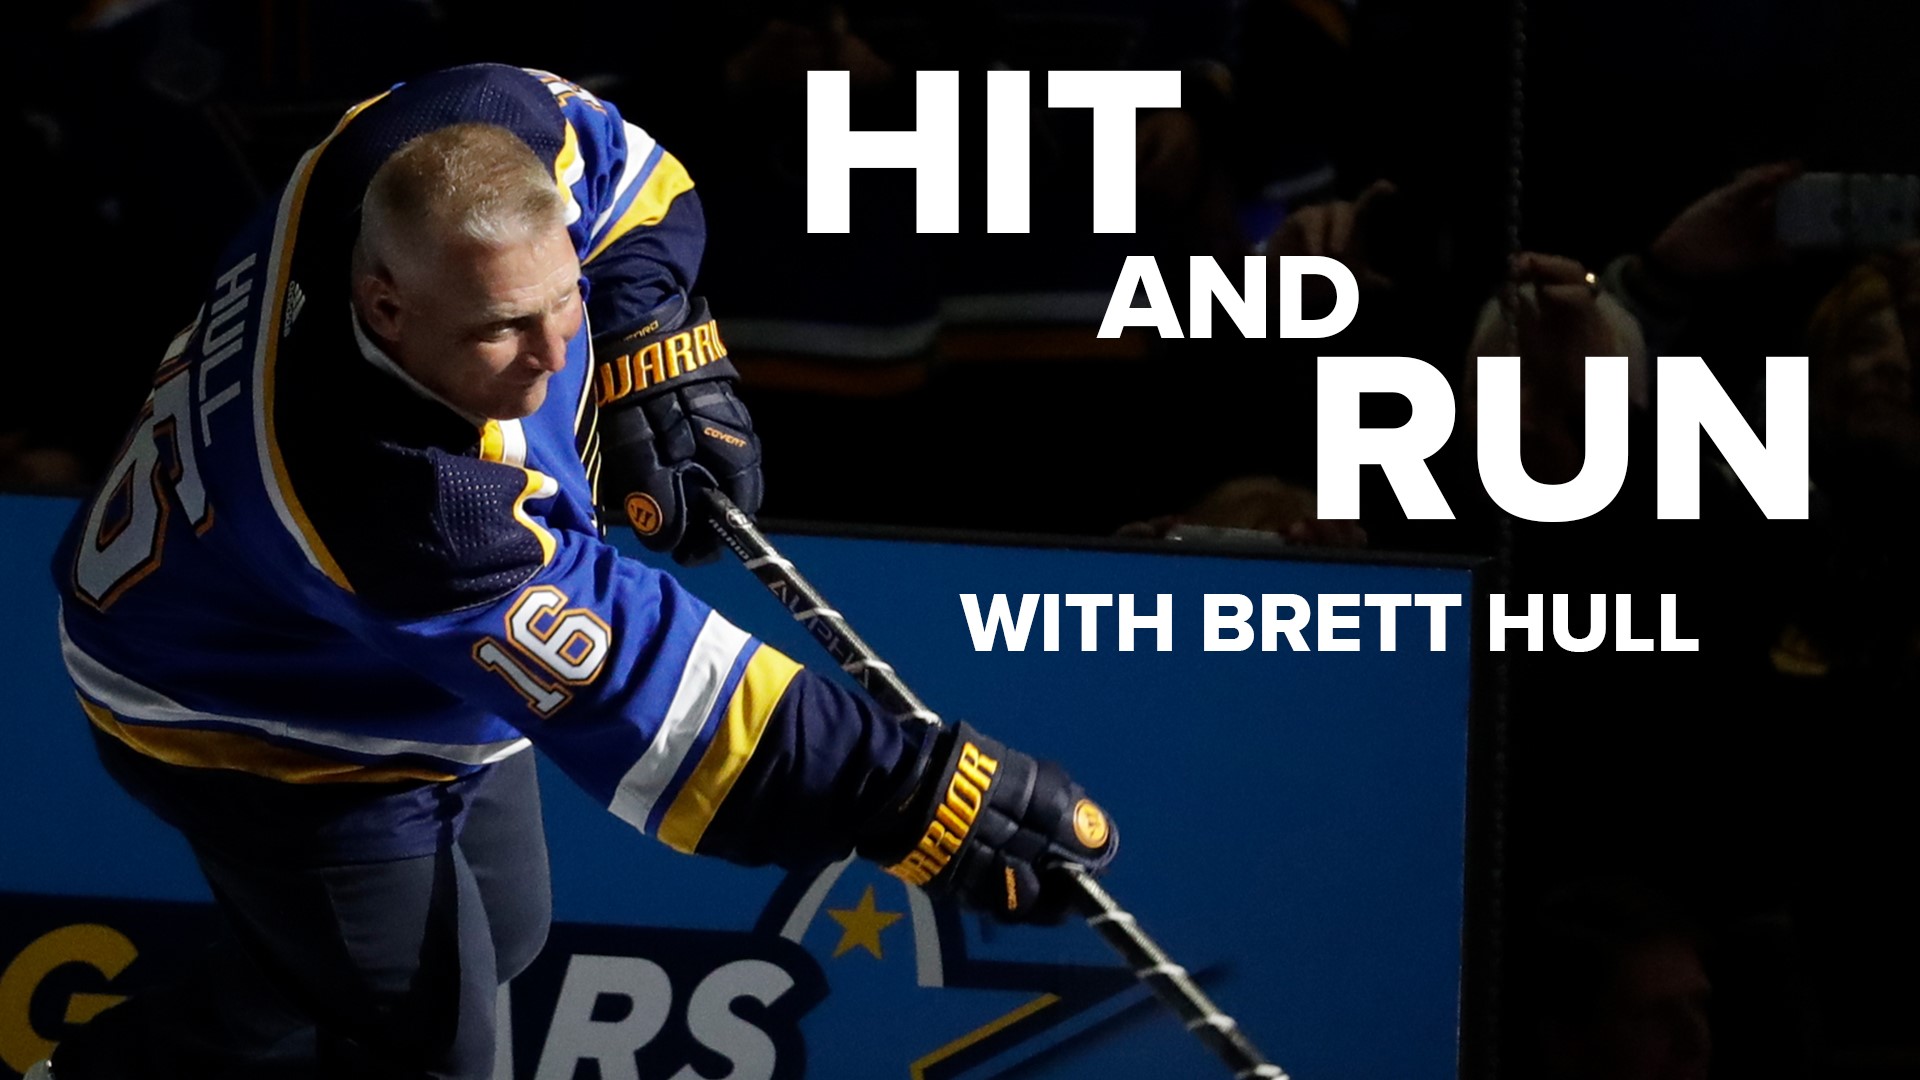 We go rapid fire with one of the best interviews in the history of St. Louis sports